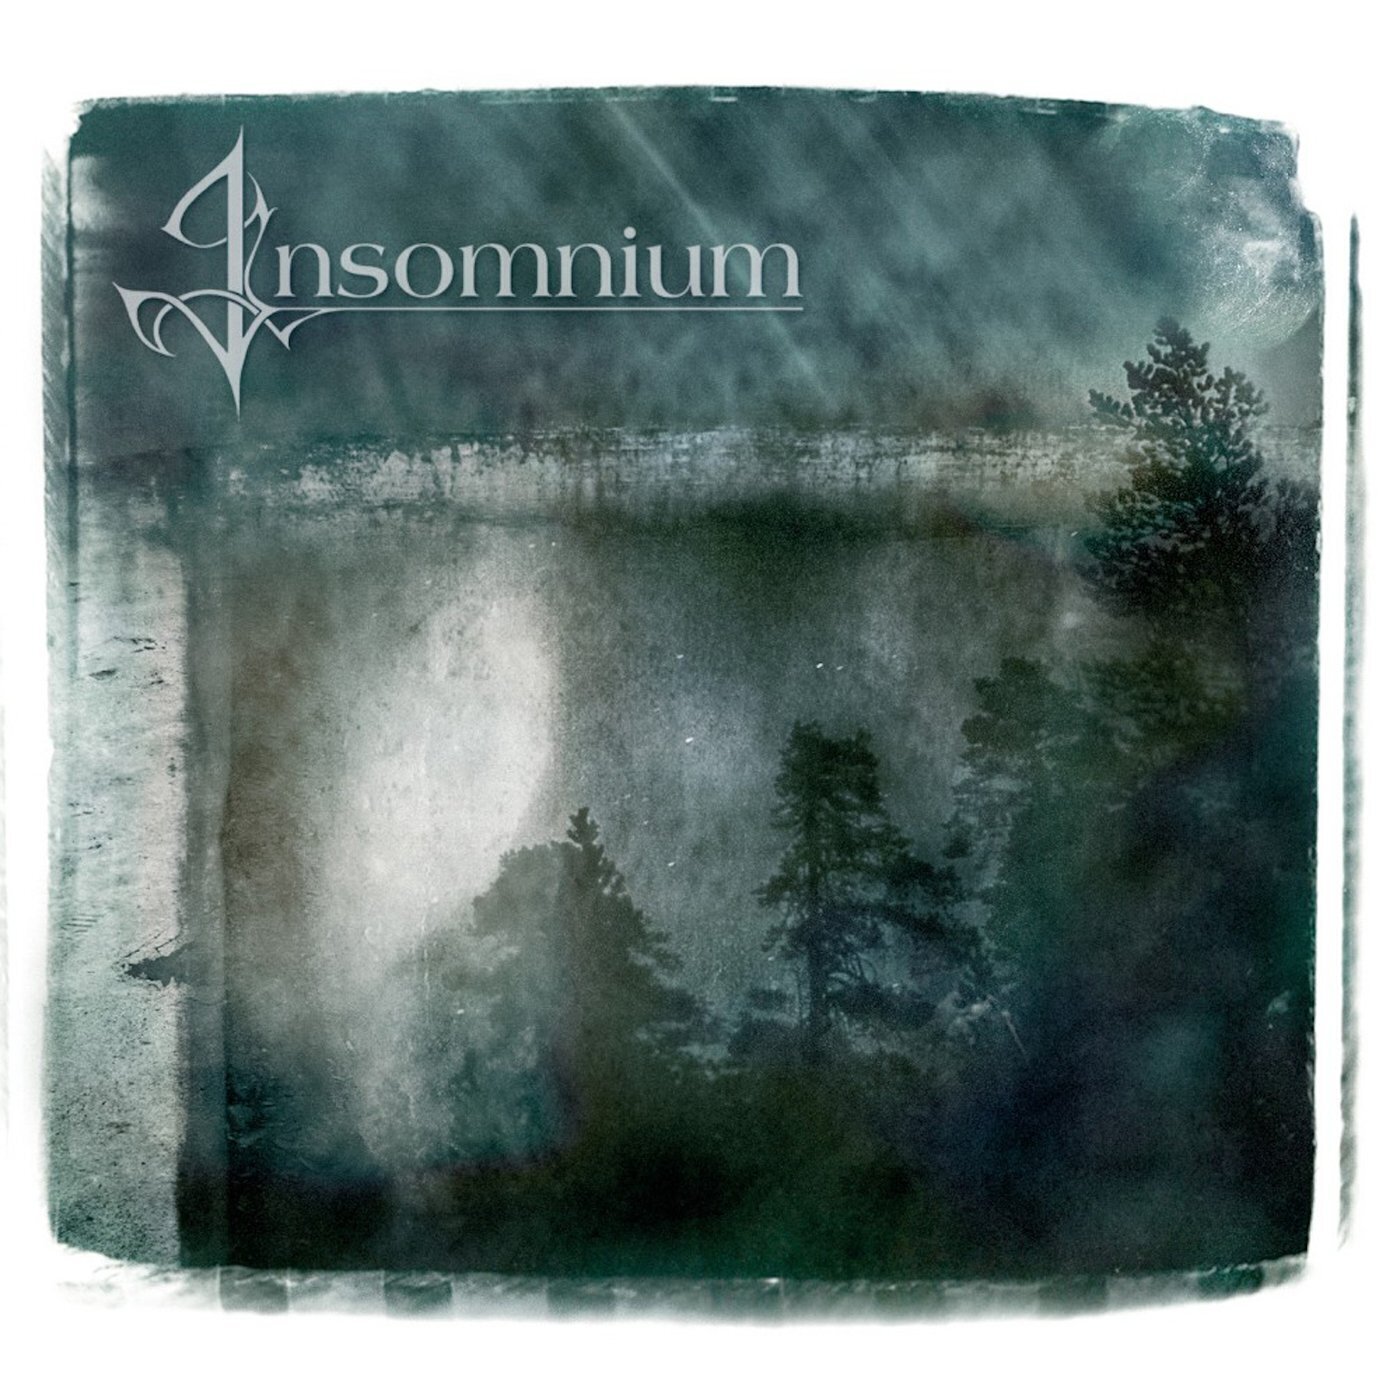 LP Insomnium - Since The Day It All Came (2 LP)